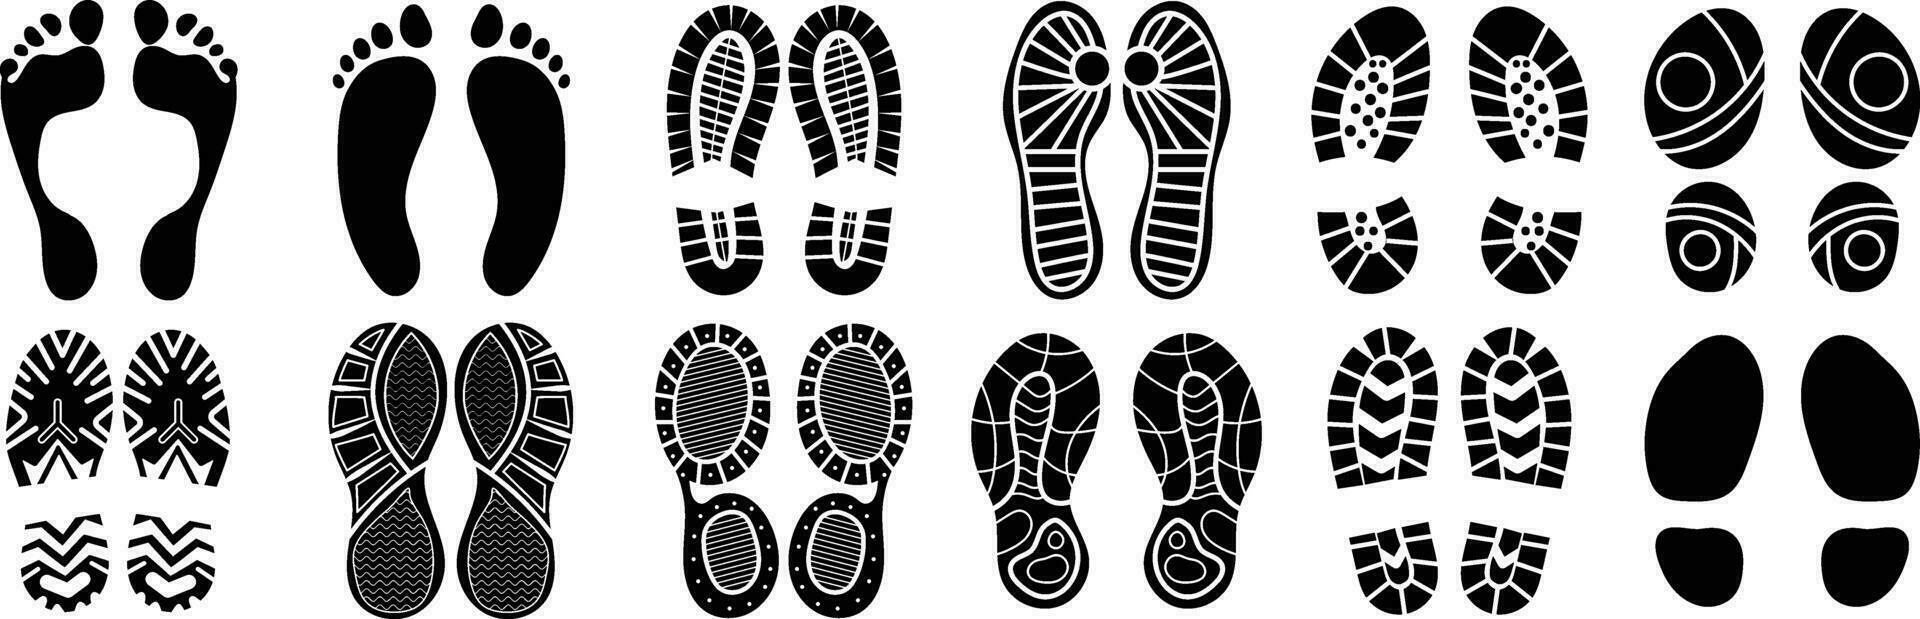 Different human footprints icon Vector